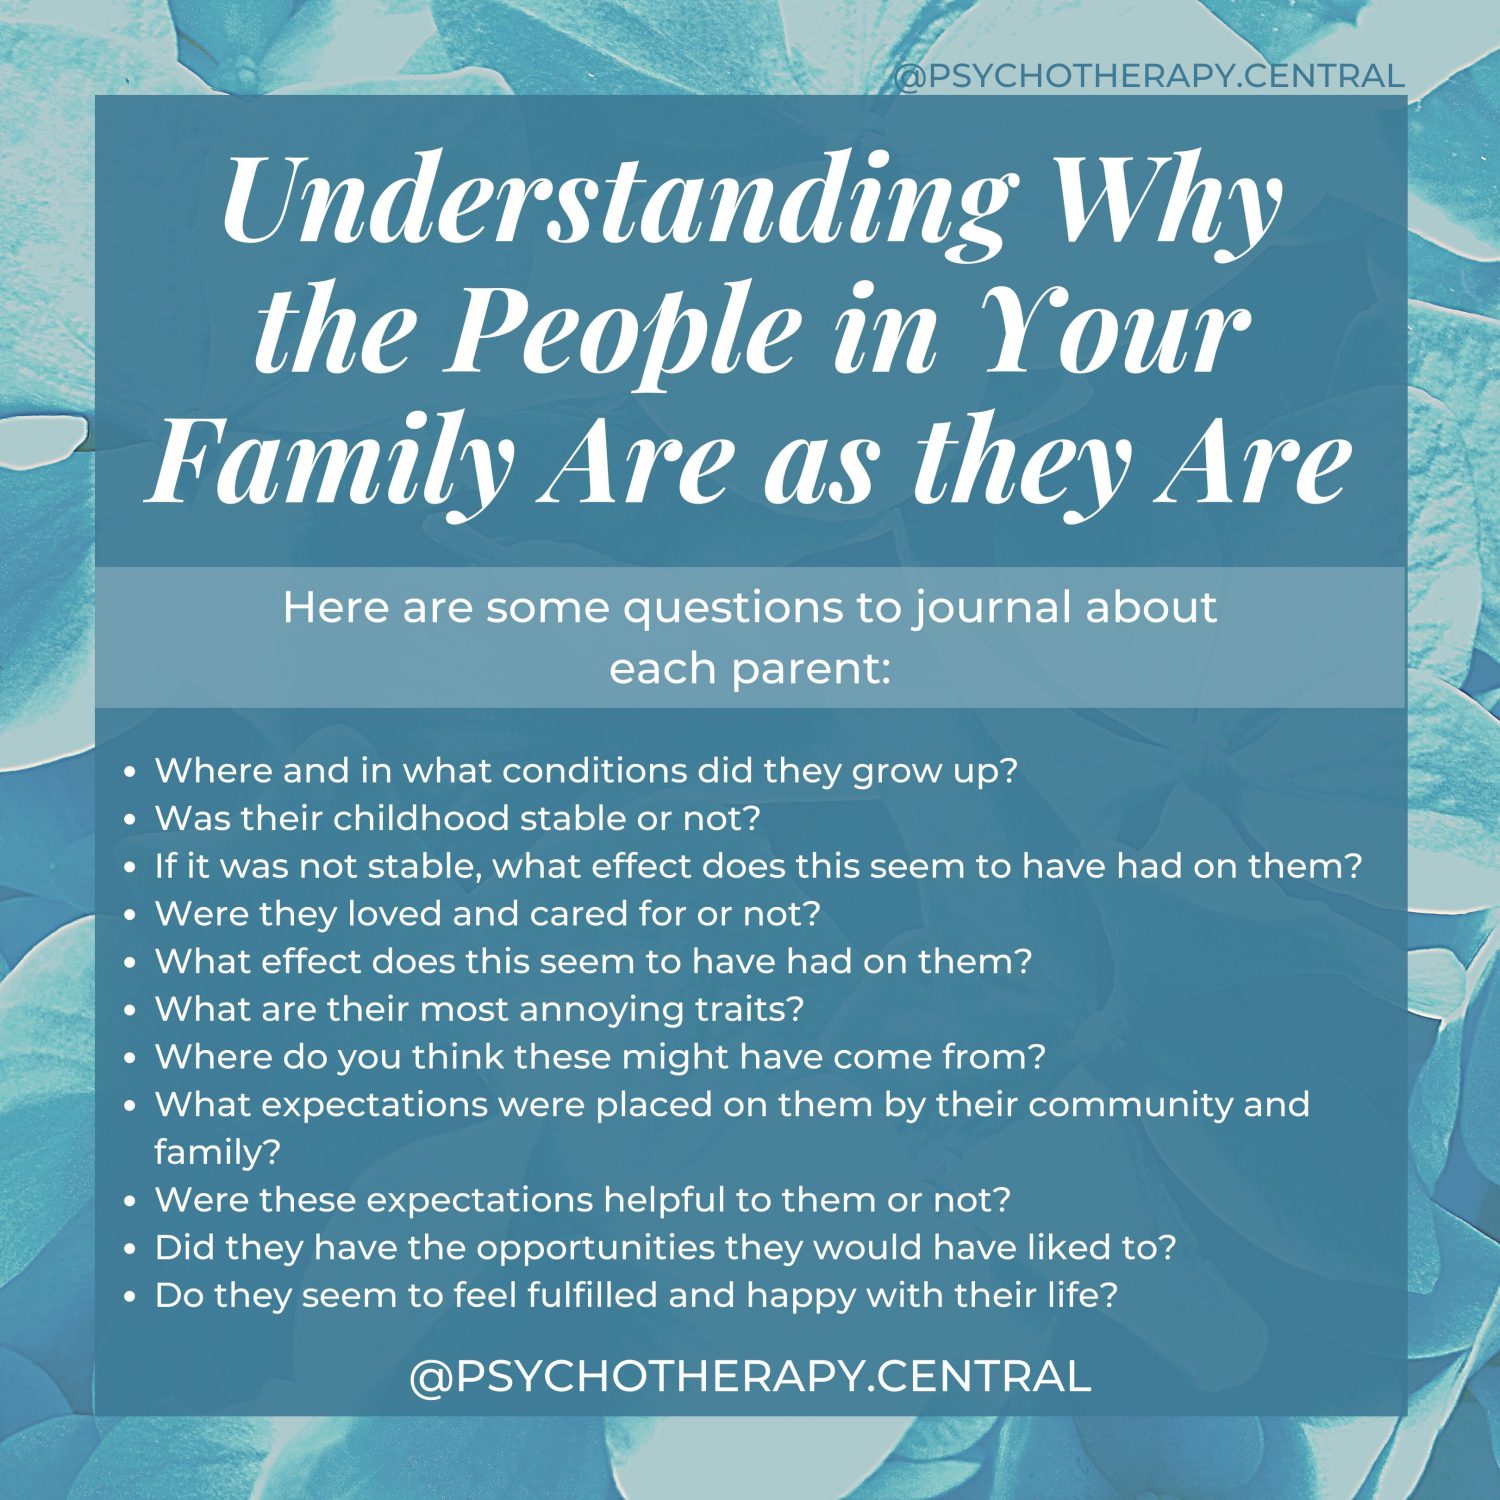 Understanding Why the People in Your Family Are as they Are